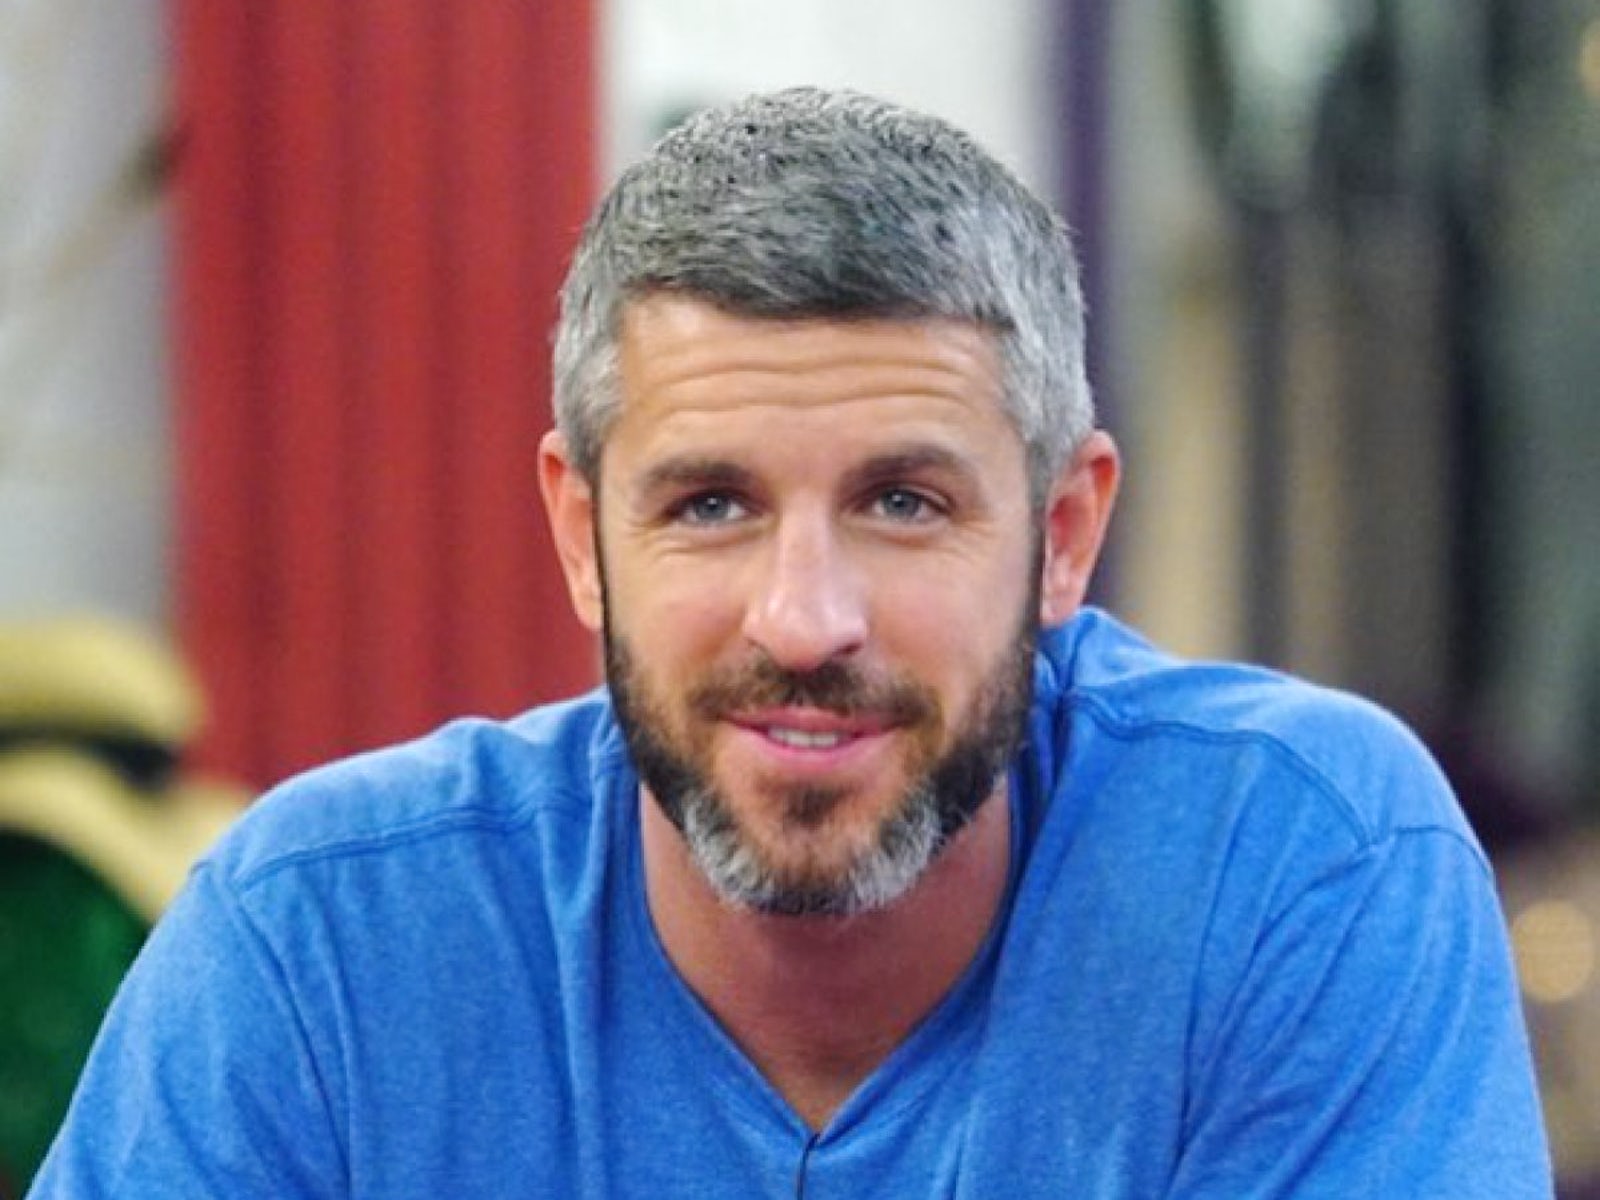 Matt Hoffman Big Brother / 78 best Past Big Brother Players images on ...